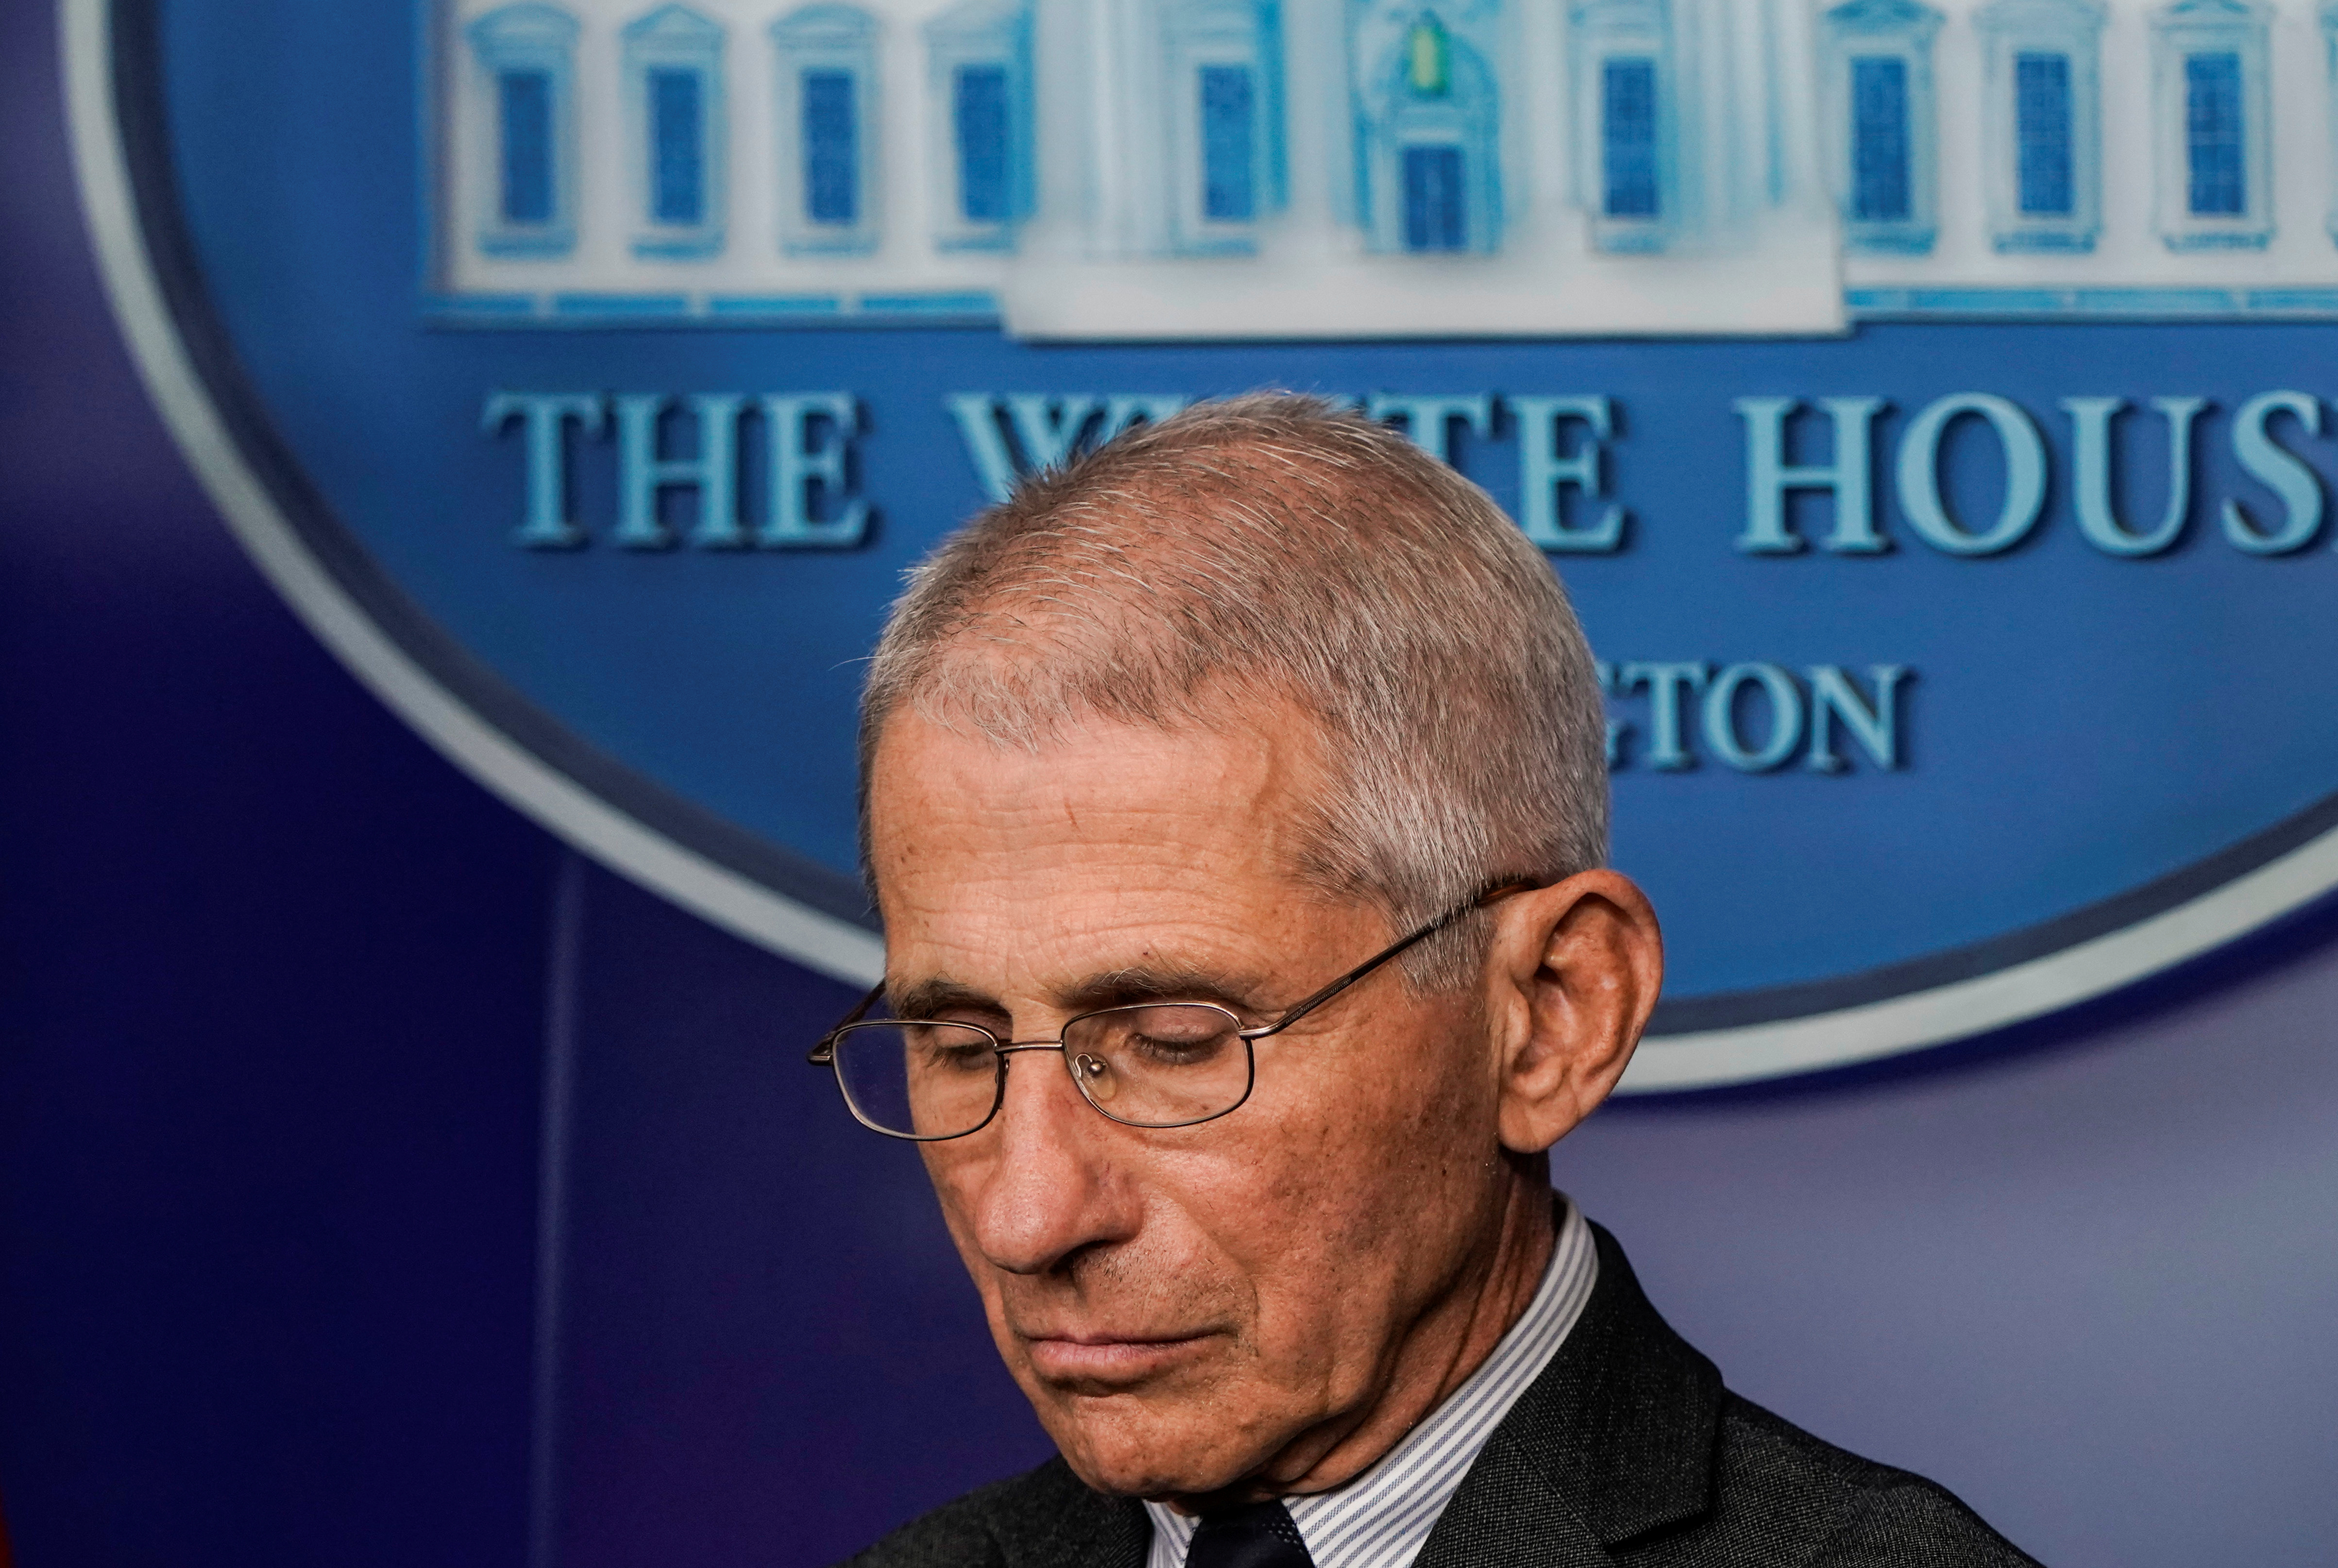 Director of the National Institute of Allergy and Infectious Diseases Anthony Fauci stands during a news briefing on the administration's response to the coronavirus disease (COVID-19) outbreak at the White House in Washington, U.S., March 21, 2020. REUTERS/Joshua Roberts